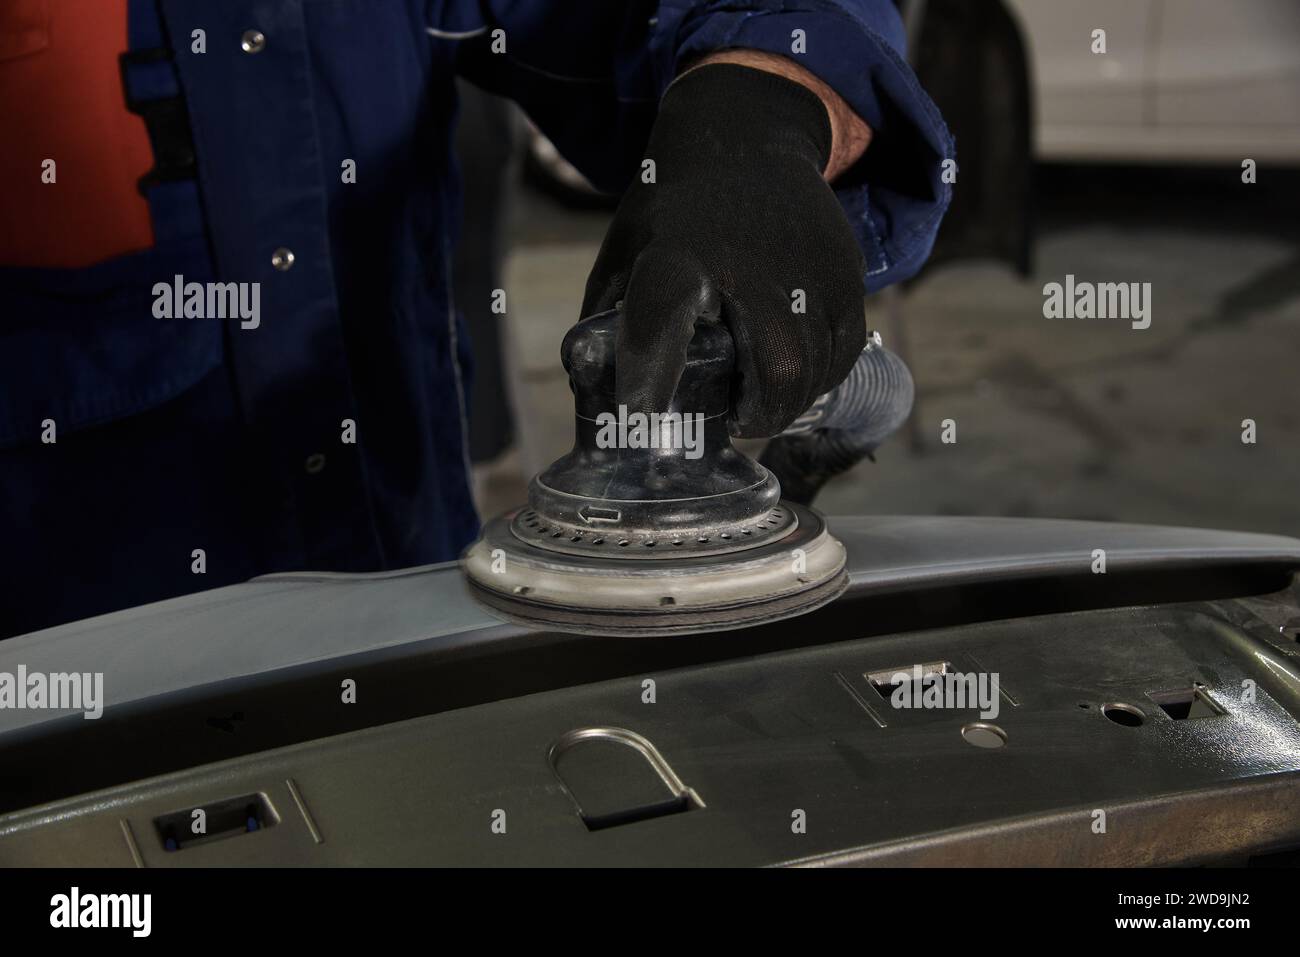 A man at a car maintenance station cleans the car part with an instrument. Preparation of car parts for painting. Car repair at the station. Car servi Stock Photo